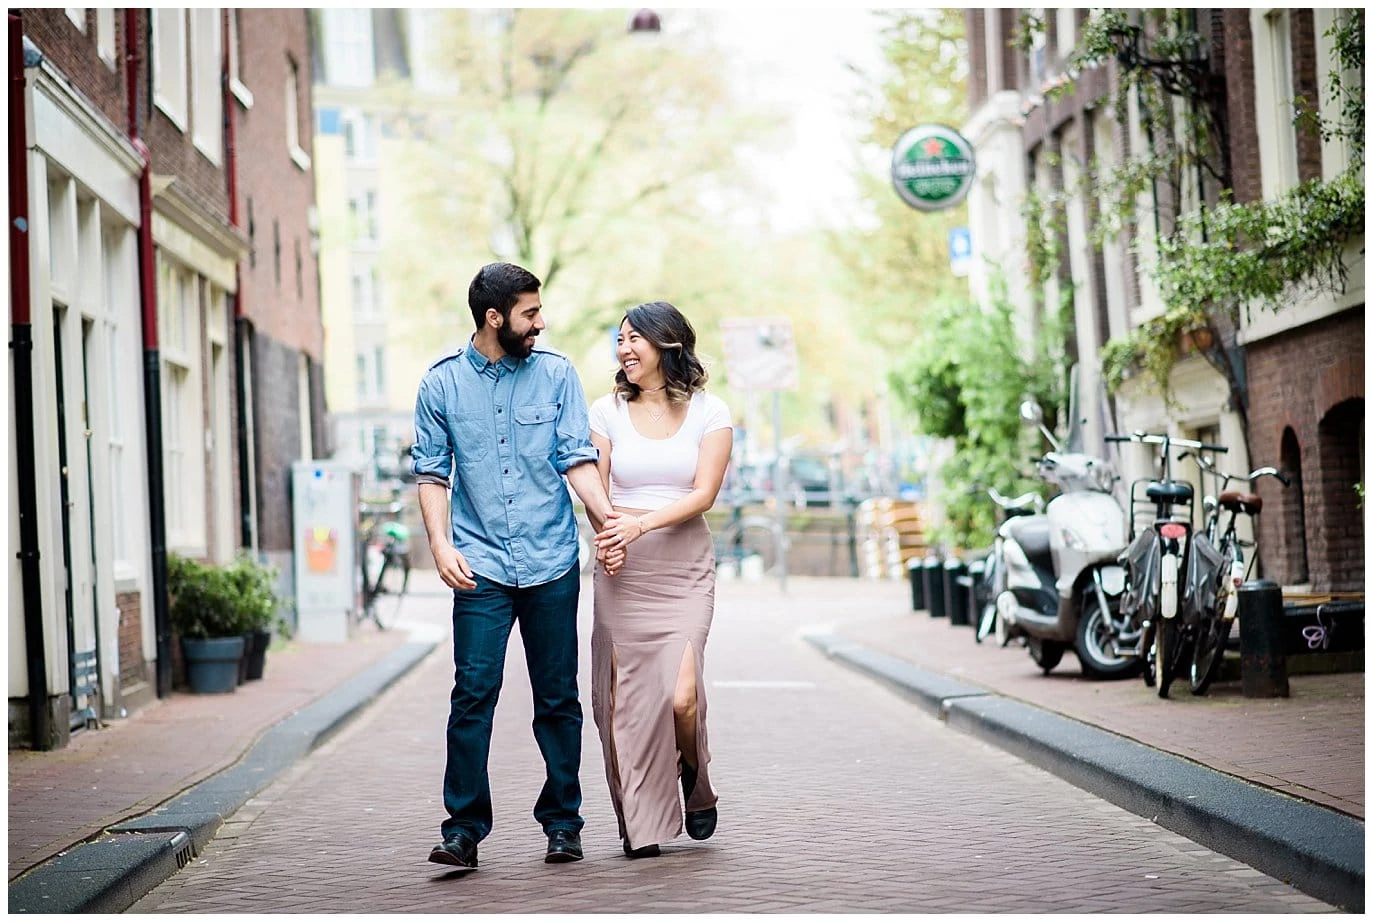 Amsterdam canal engagement photo